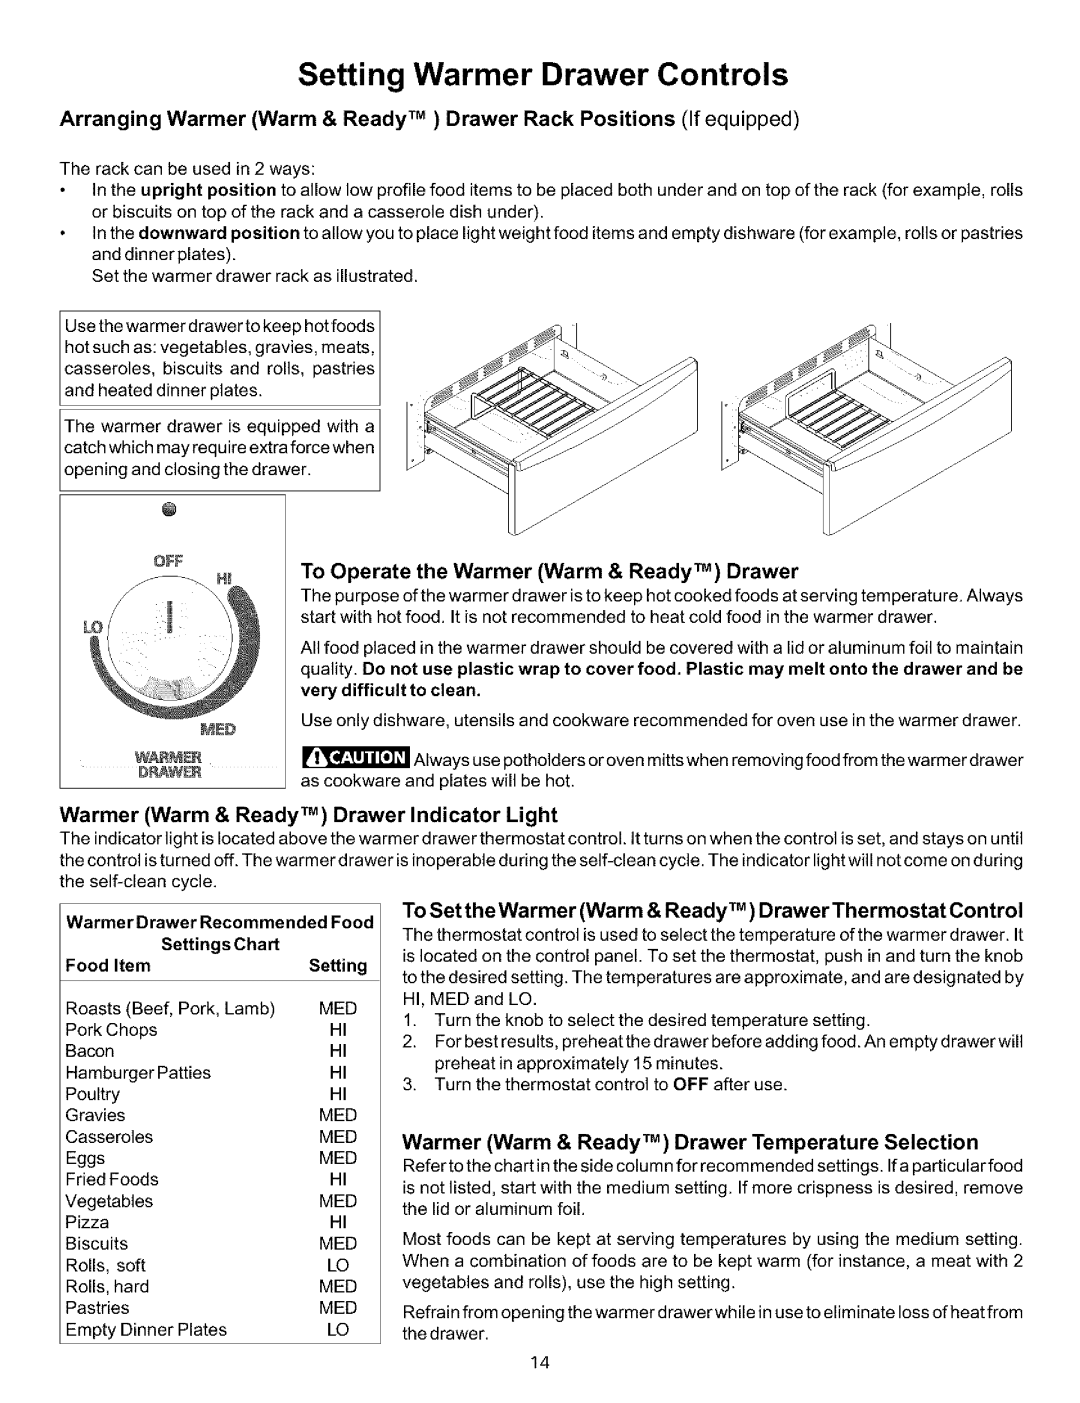 Sears 790.93751 Setting Warmer Drawer Controls, To Operate the Warmer Warm & Ready TM Drawer, very difficult to clean 